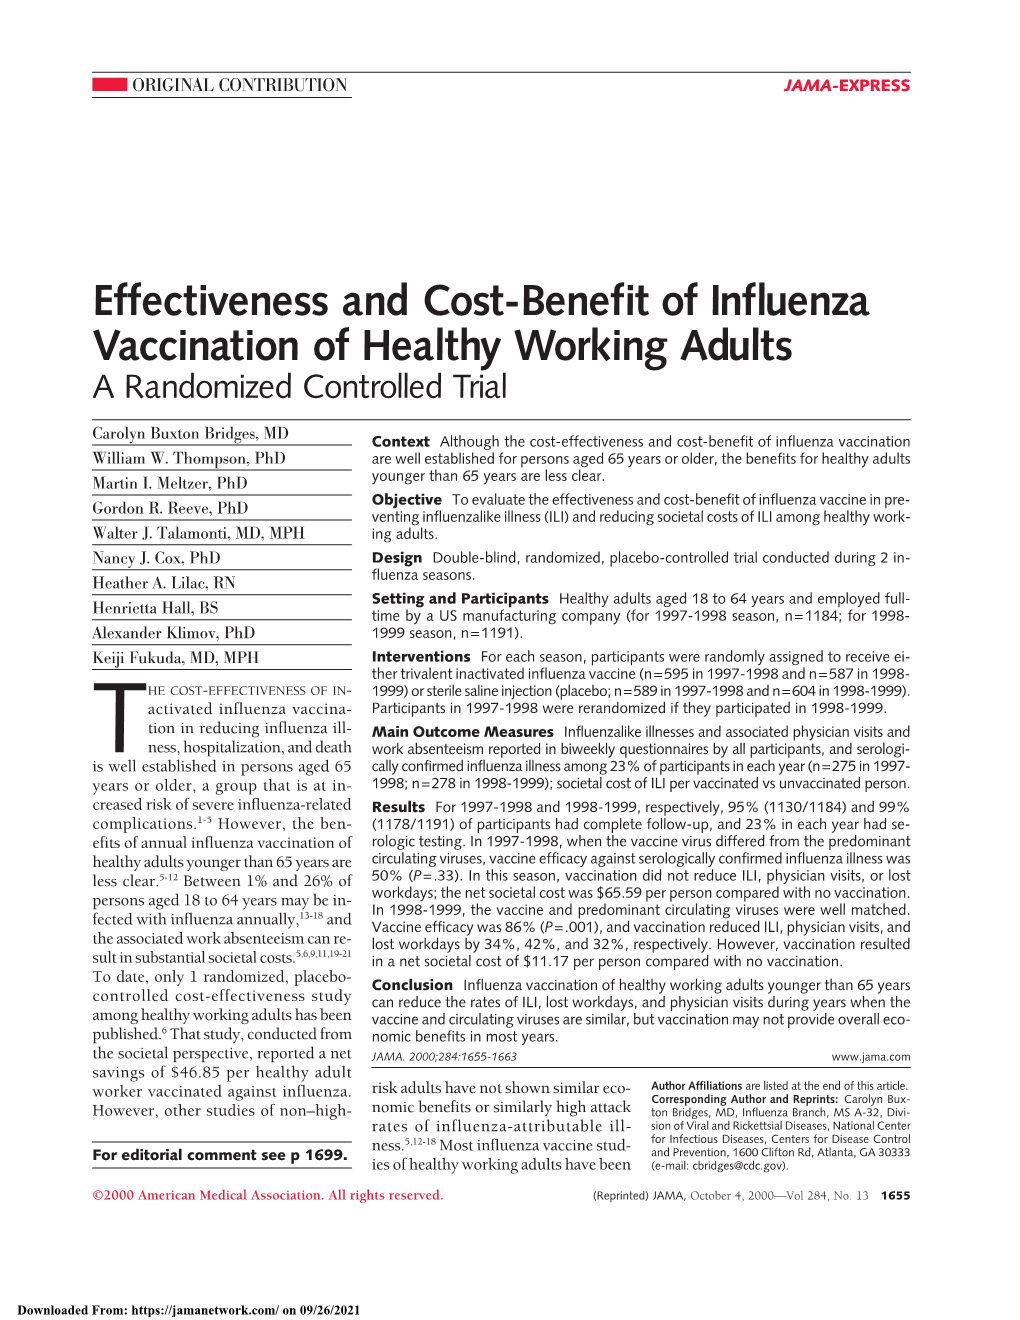 Effectiveness and Cost-Benefit of Influenza Vaccination of Healthy Working Adults a Randomized Controlled Trial